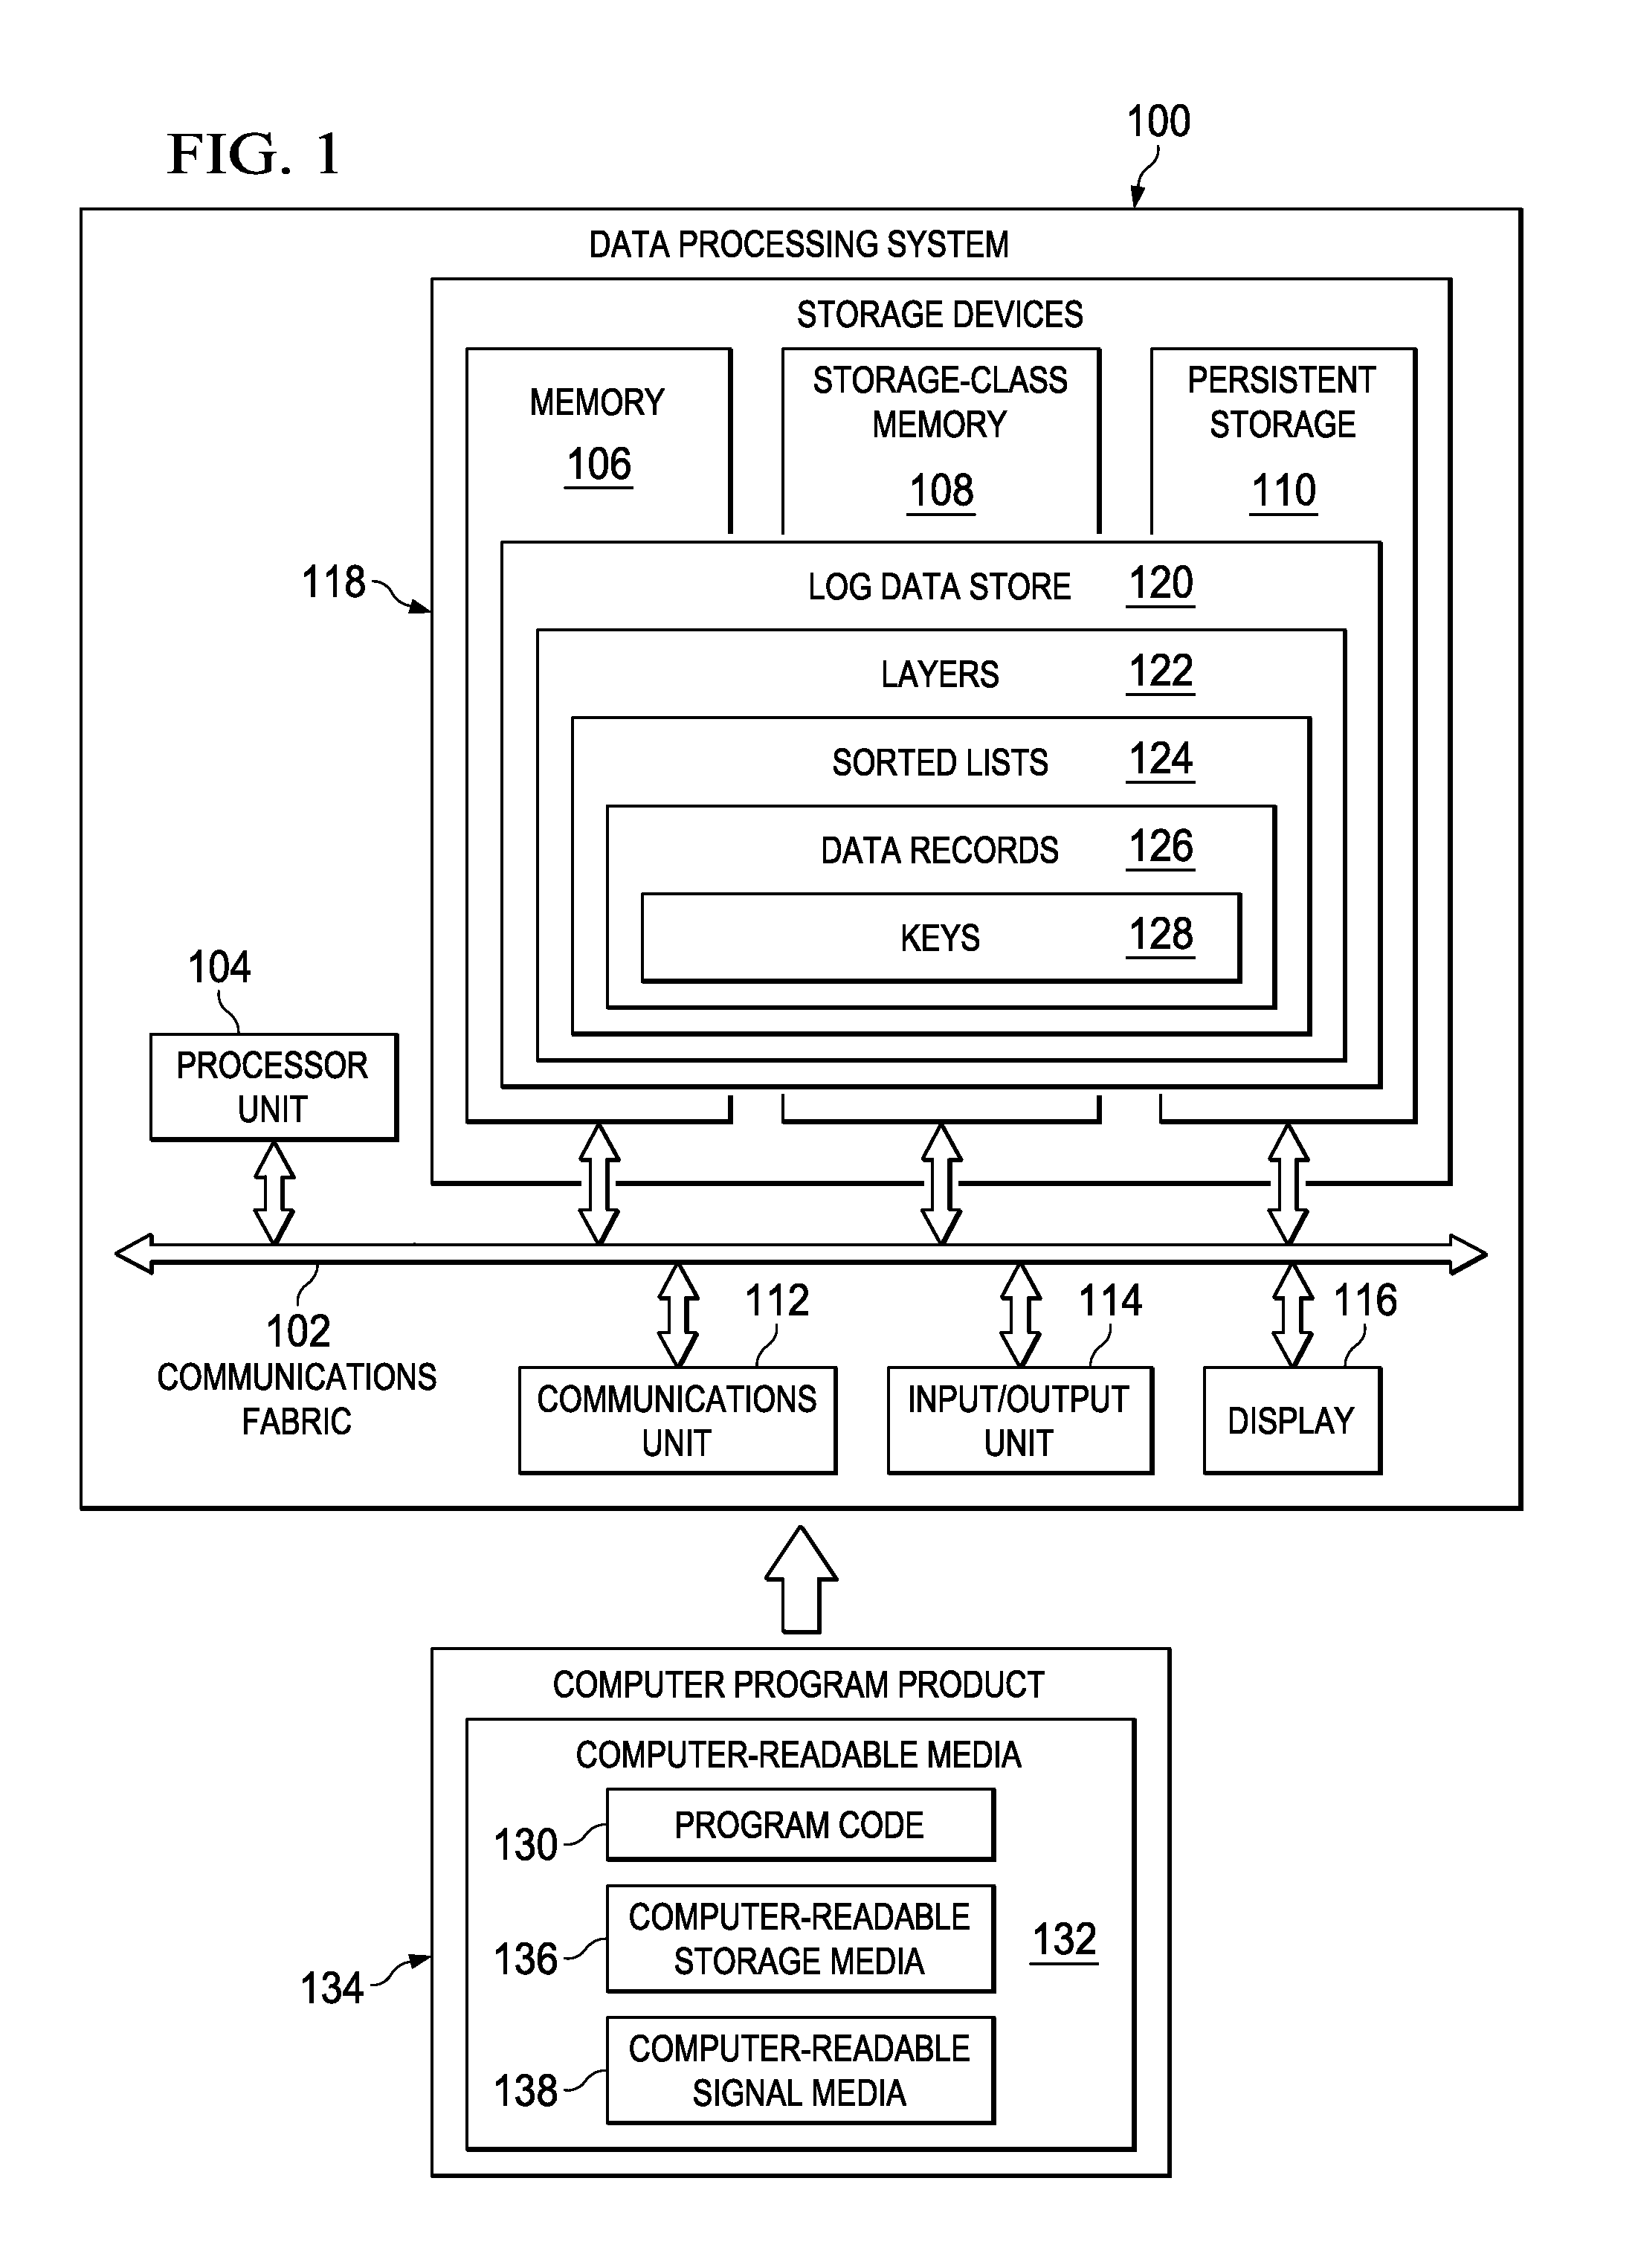 Log data store that stores data across a plurality of storage devices using non-disjoint layers